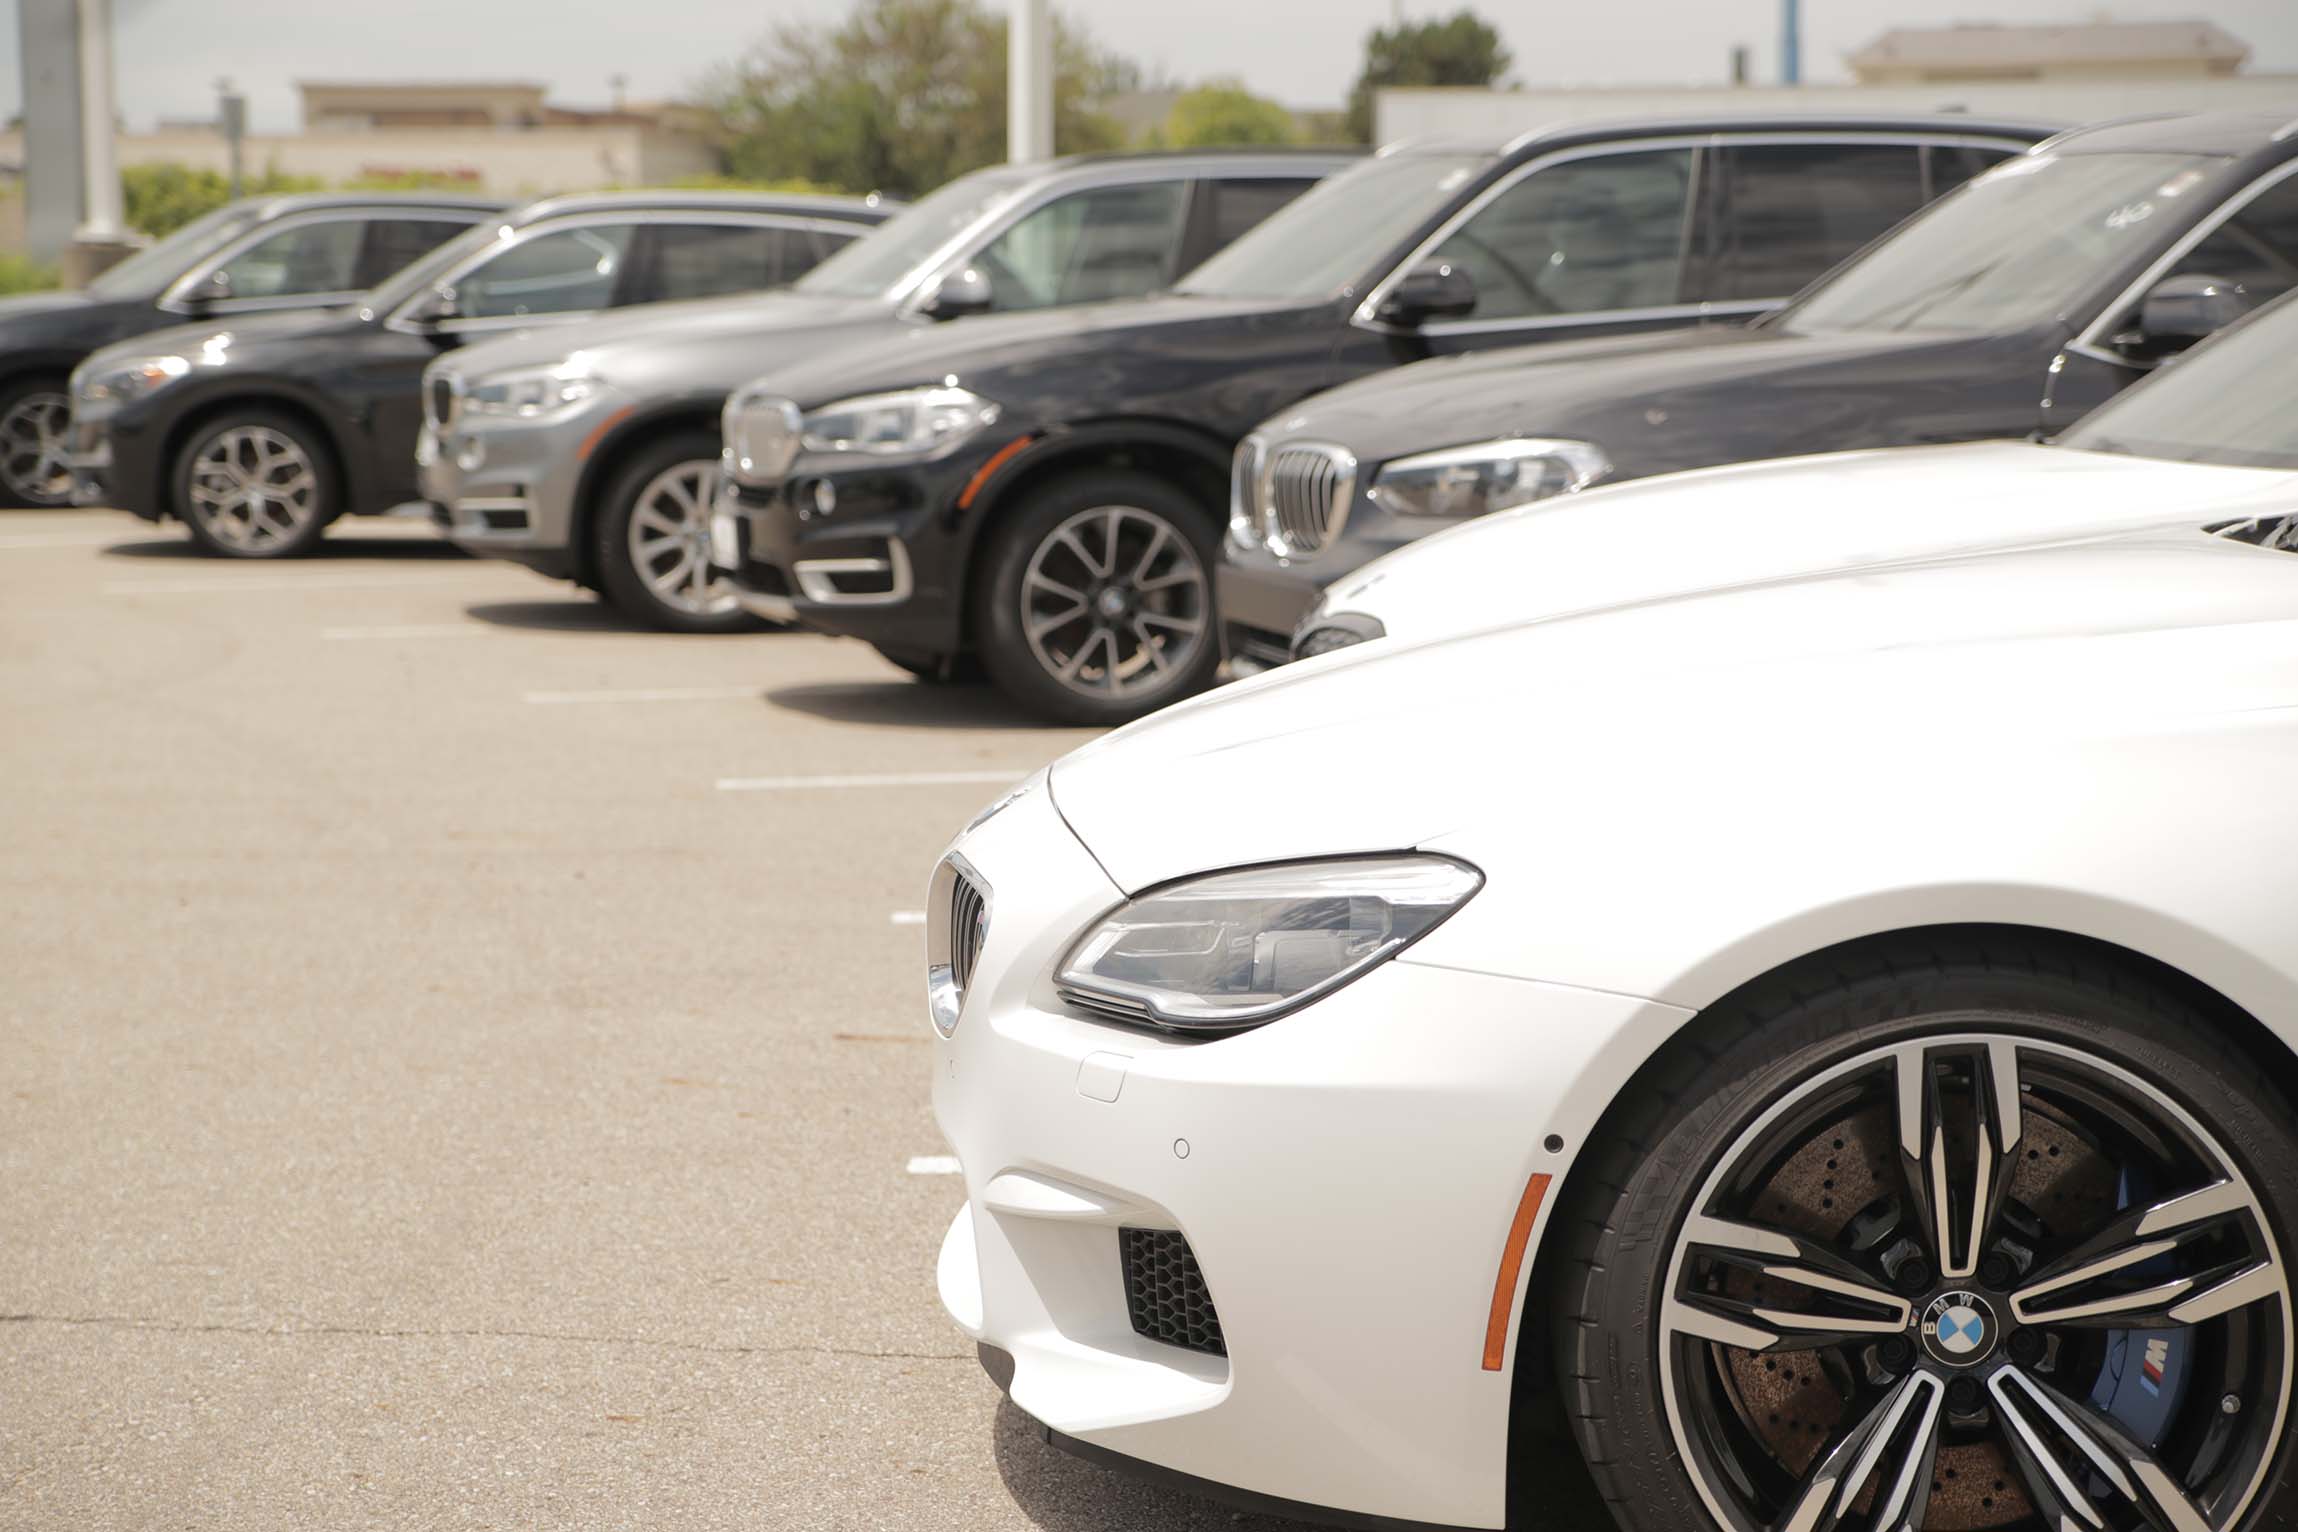 BMW vehicles at our dealership in Dayton, OH